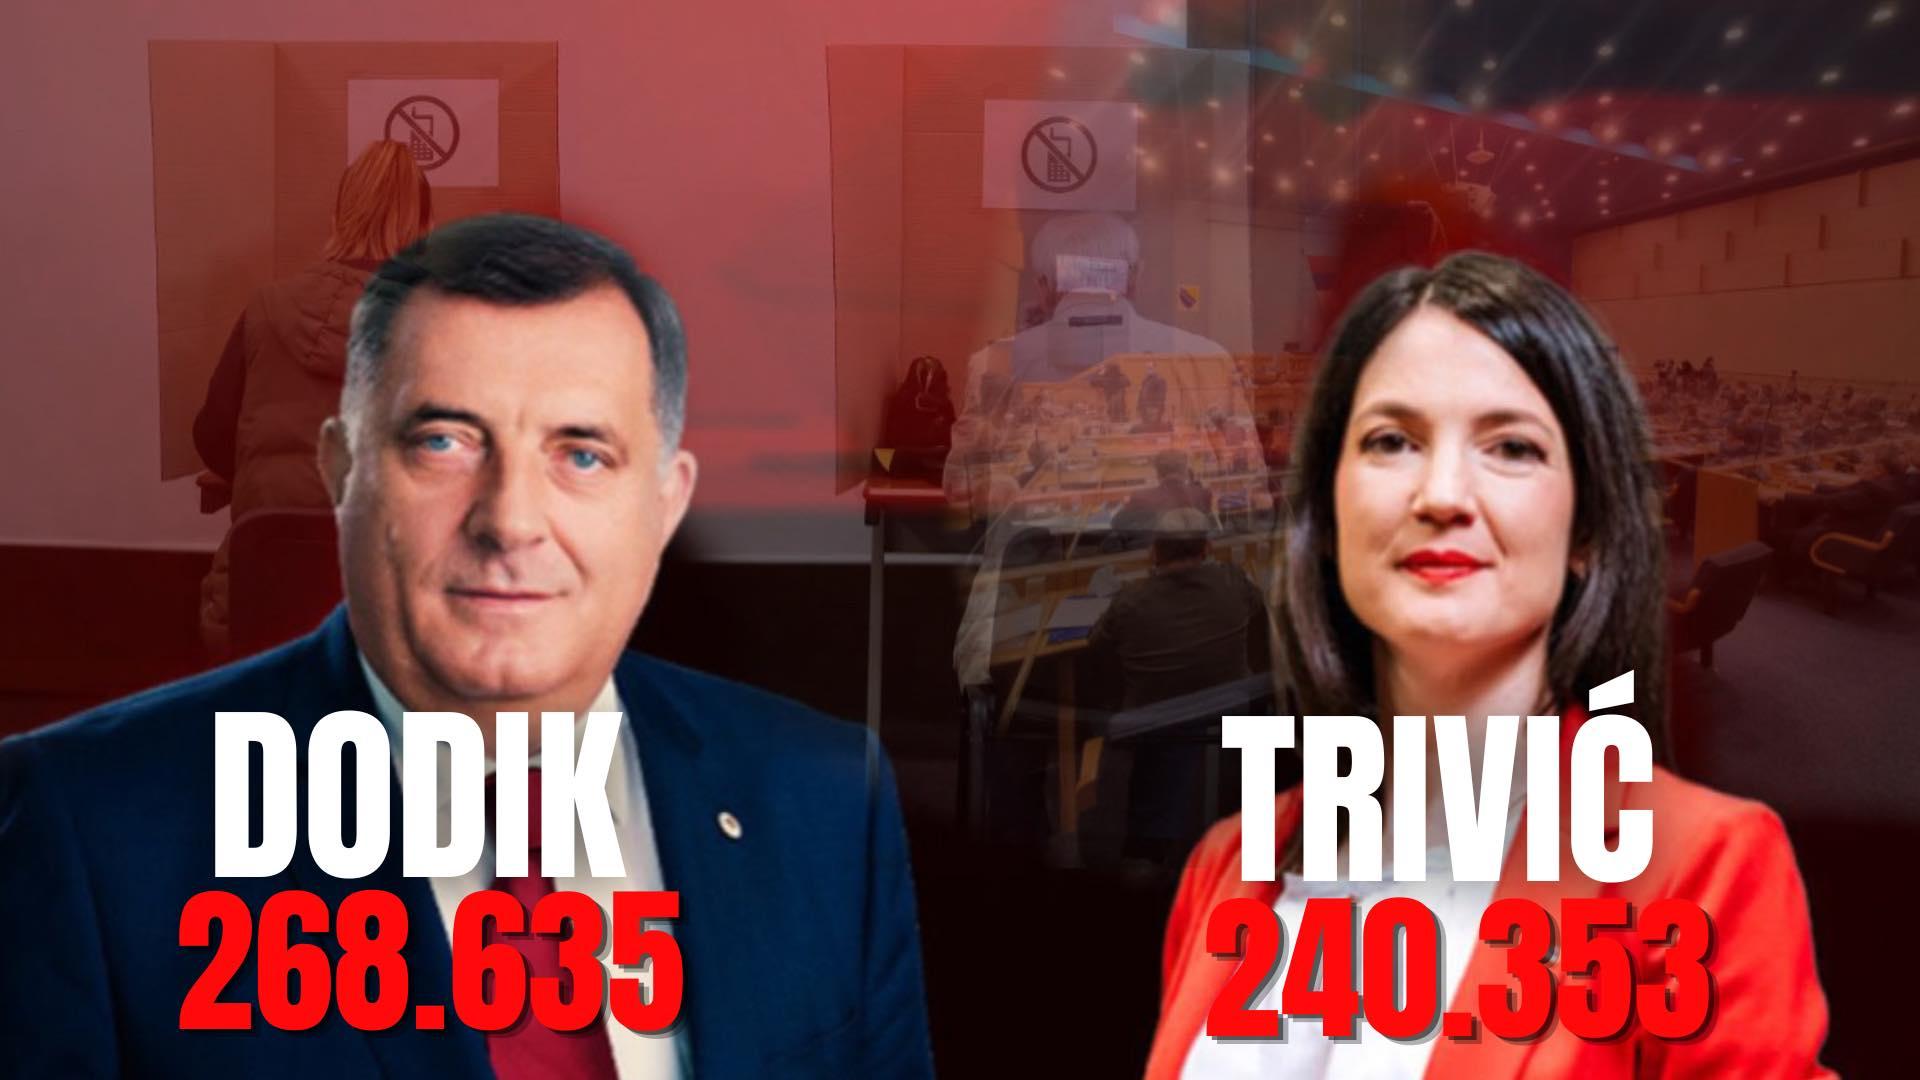 Dodik leads by some 28,000 votes against Trivić in the race for president of the RS